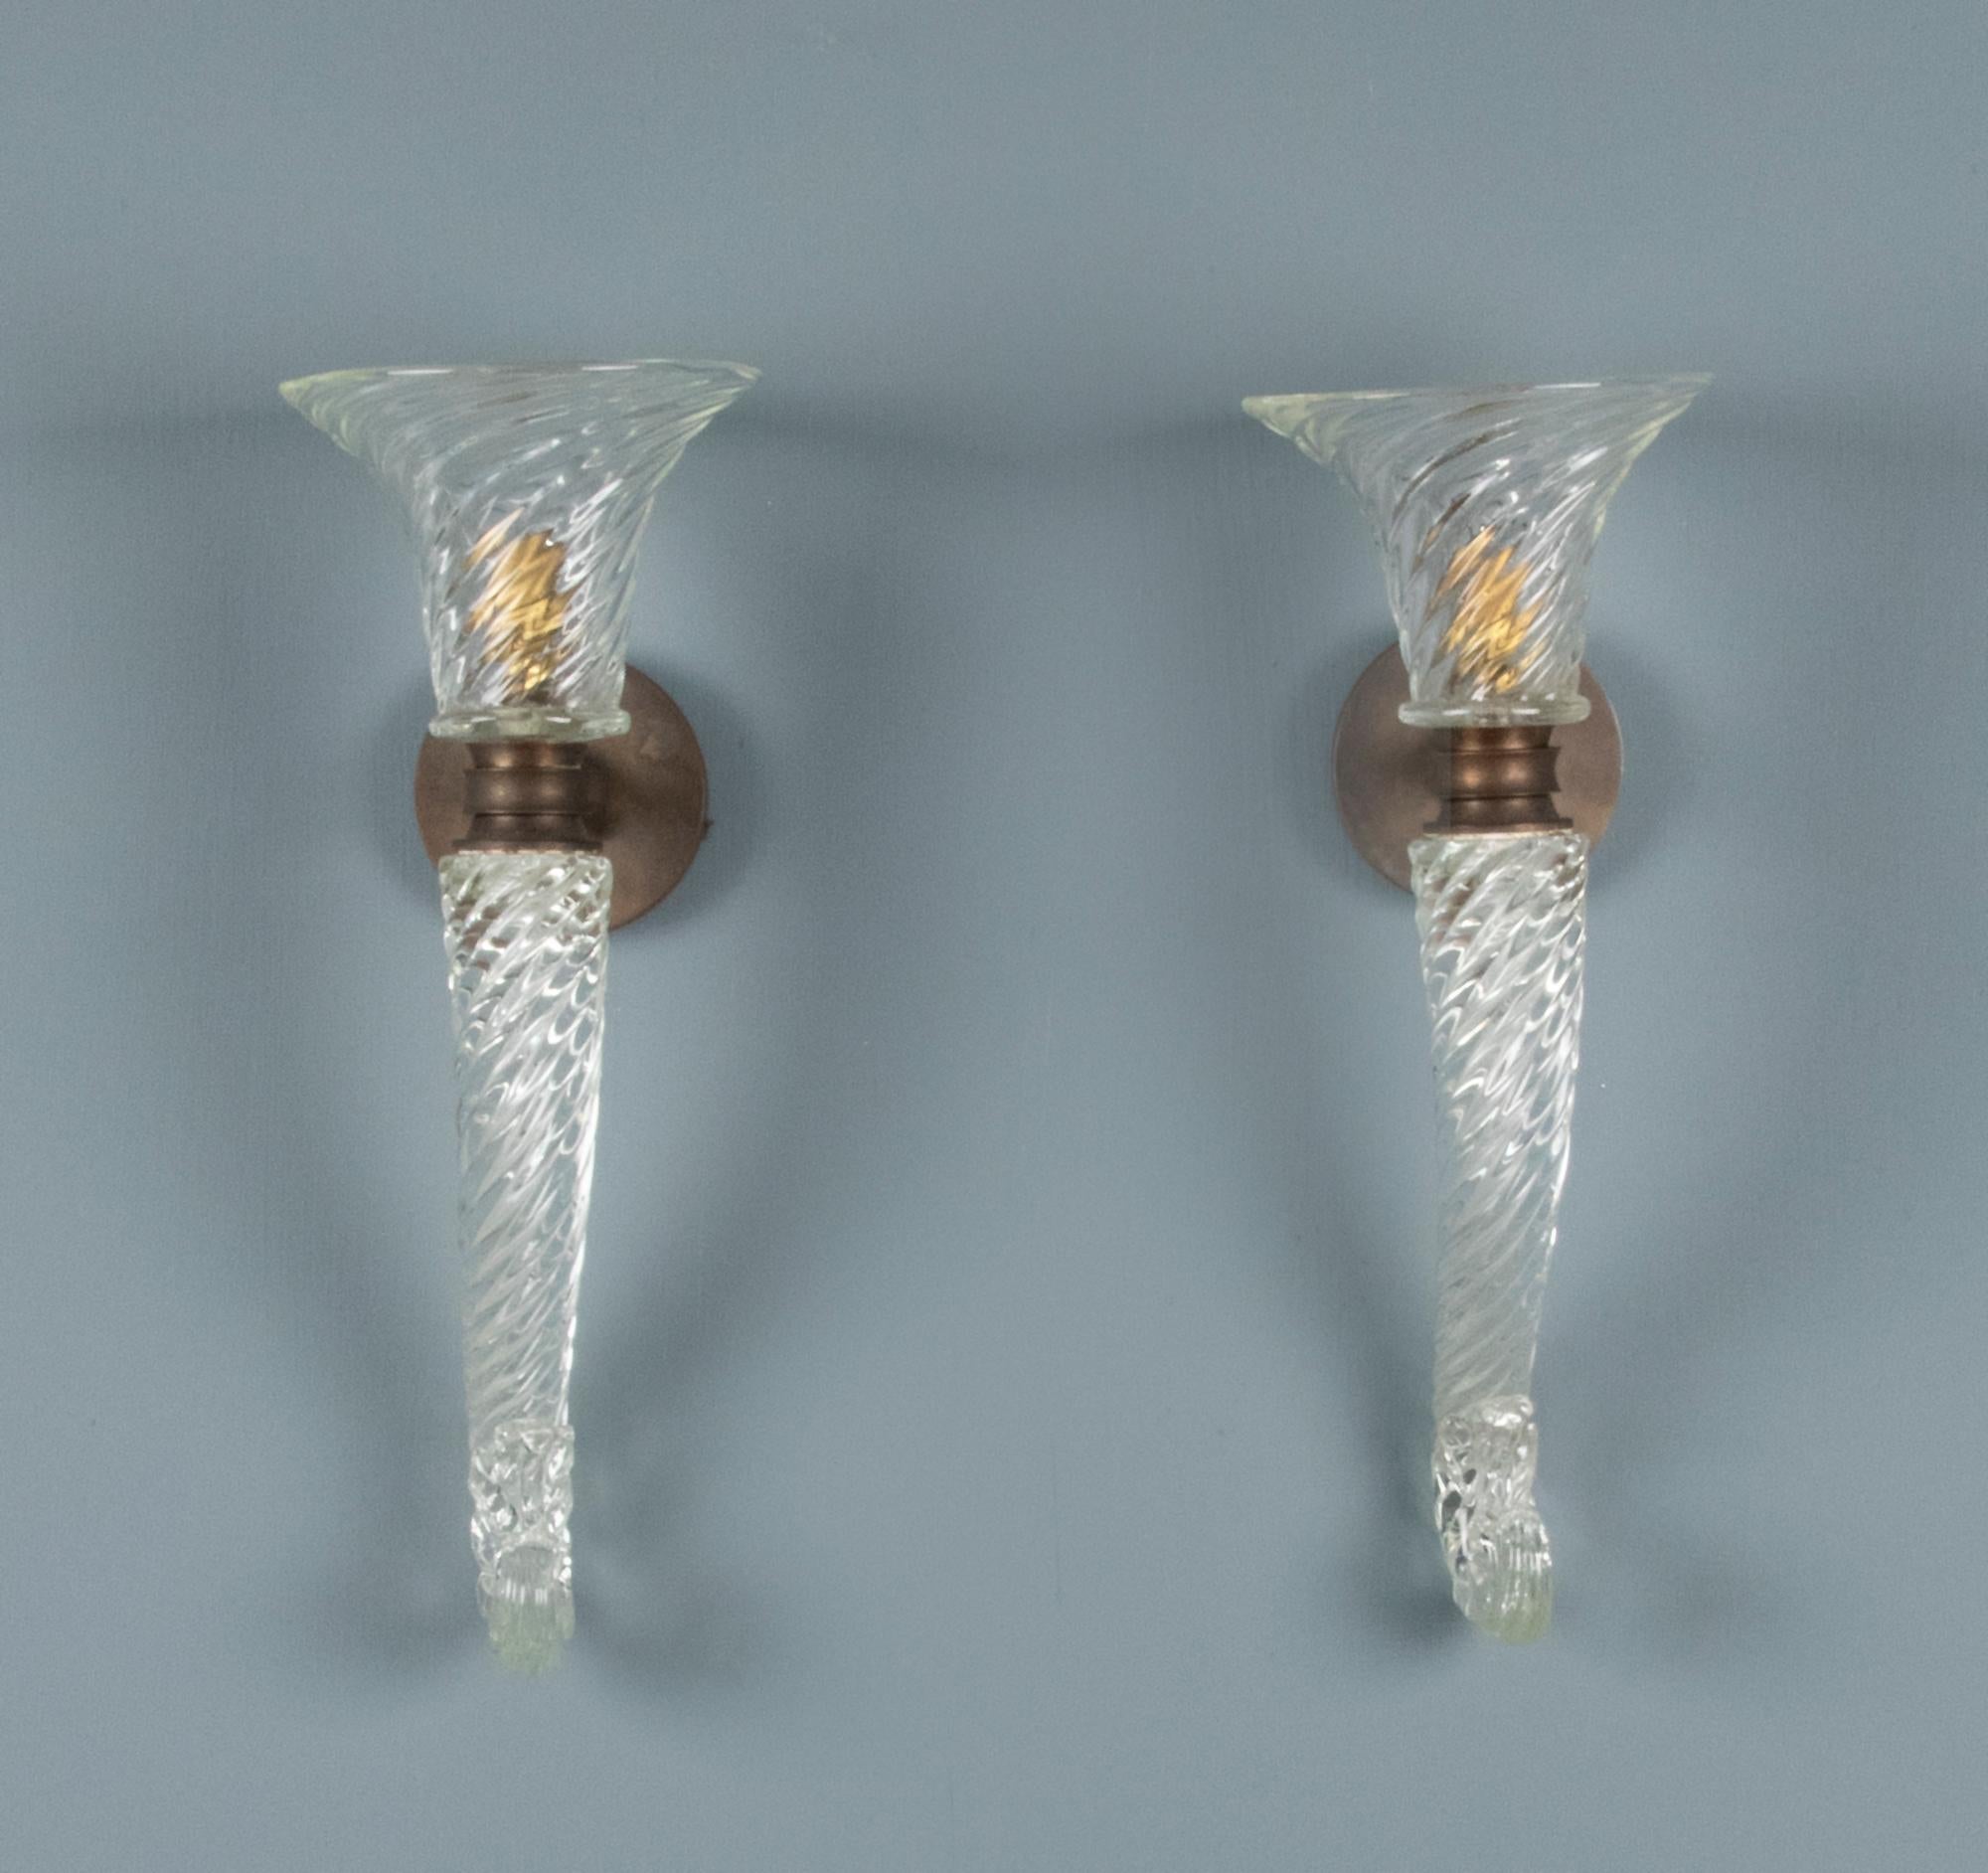 A beautiful pair of wall lamps from the famous Murano maker Seguso. The lamps are made of Murano glass with copper mounts. Beautifully turned glassware, both lamps are hand signed in the chalice. These lamps date from circa 1940. Great condition.